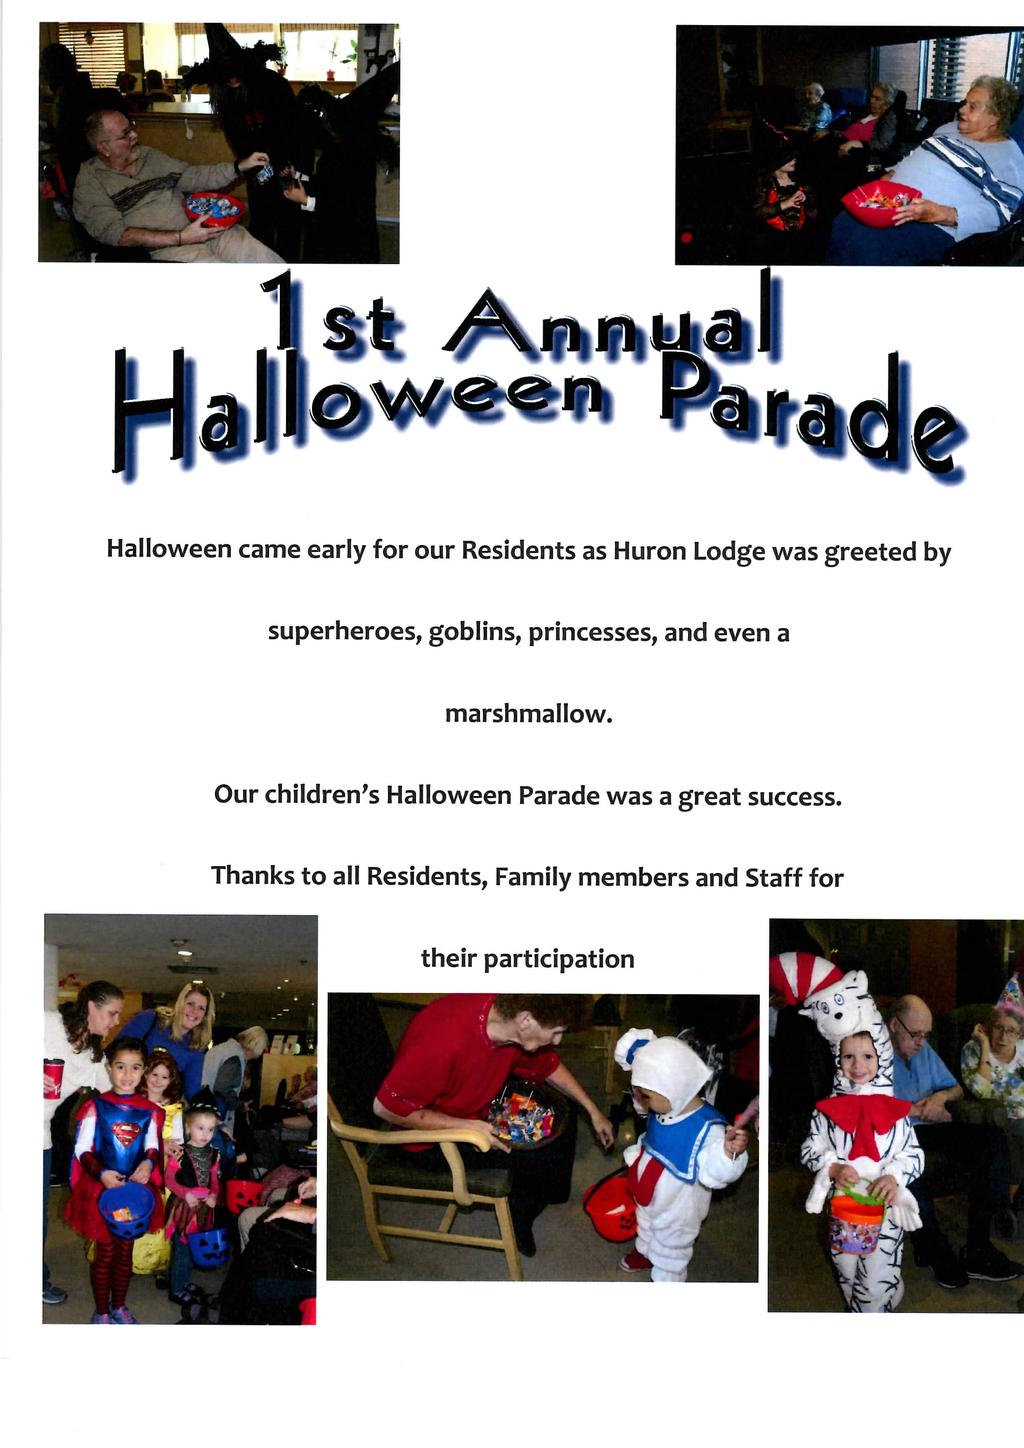 Halloween came early for our Residents as Huron Lodge was greeted by superheroes, goblins, princesses, and even a marshmallow.